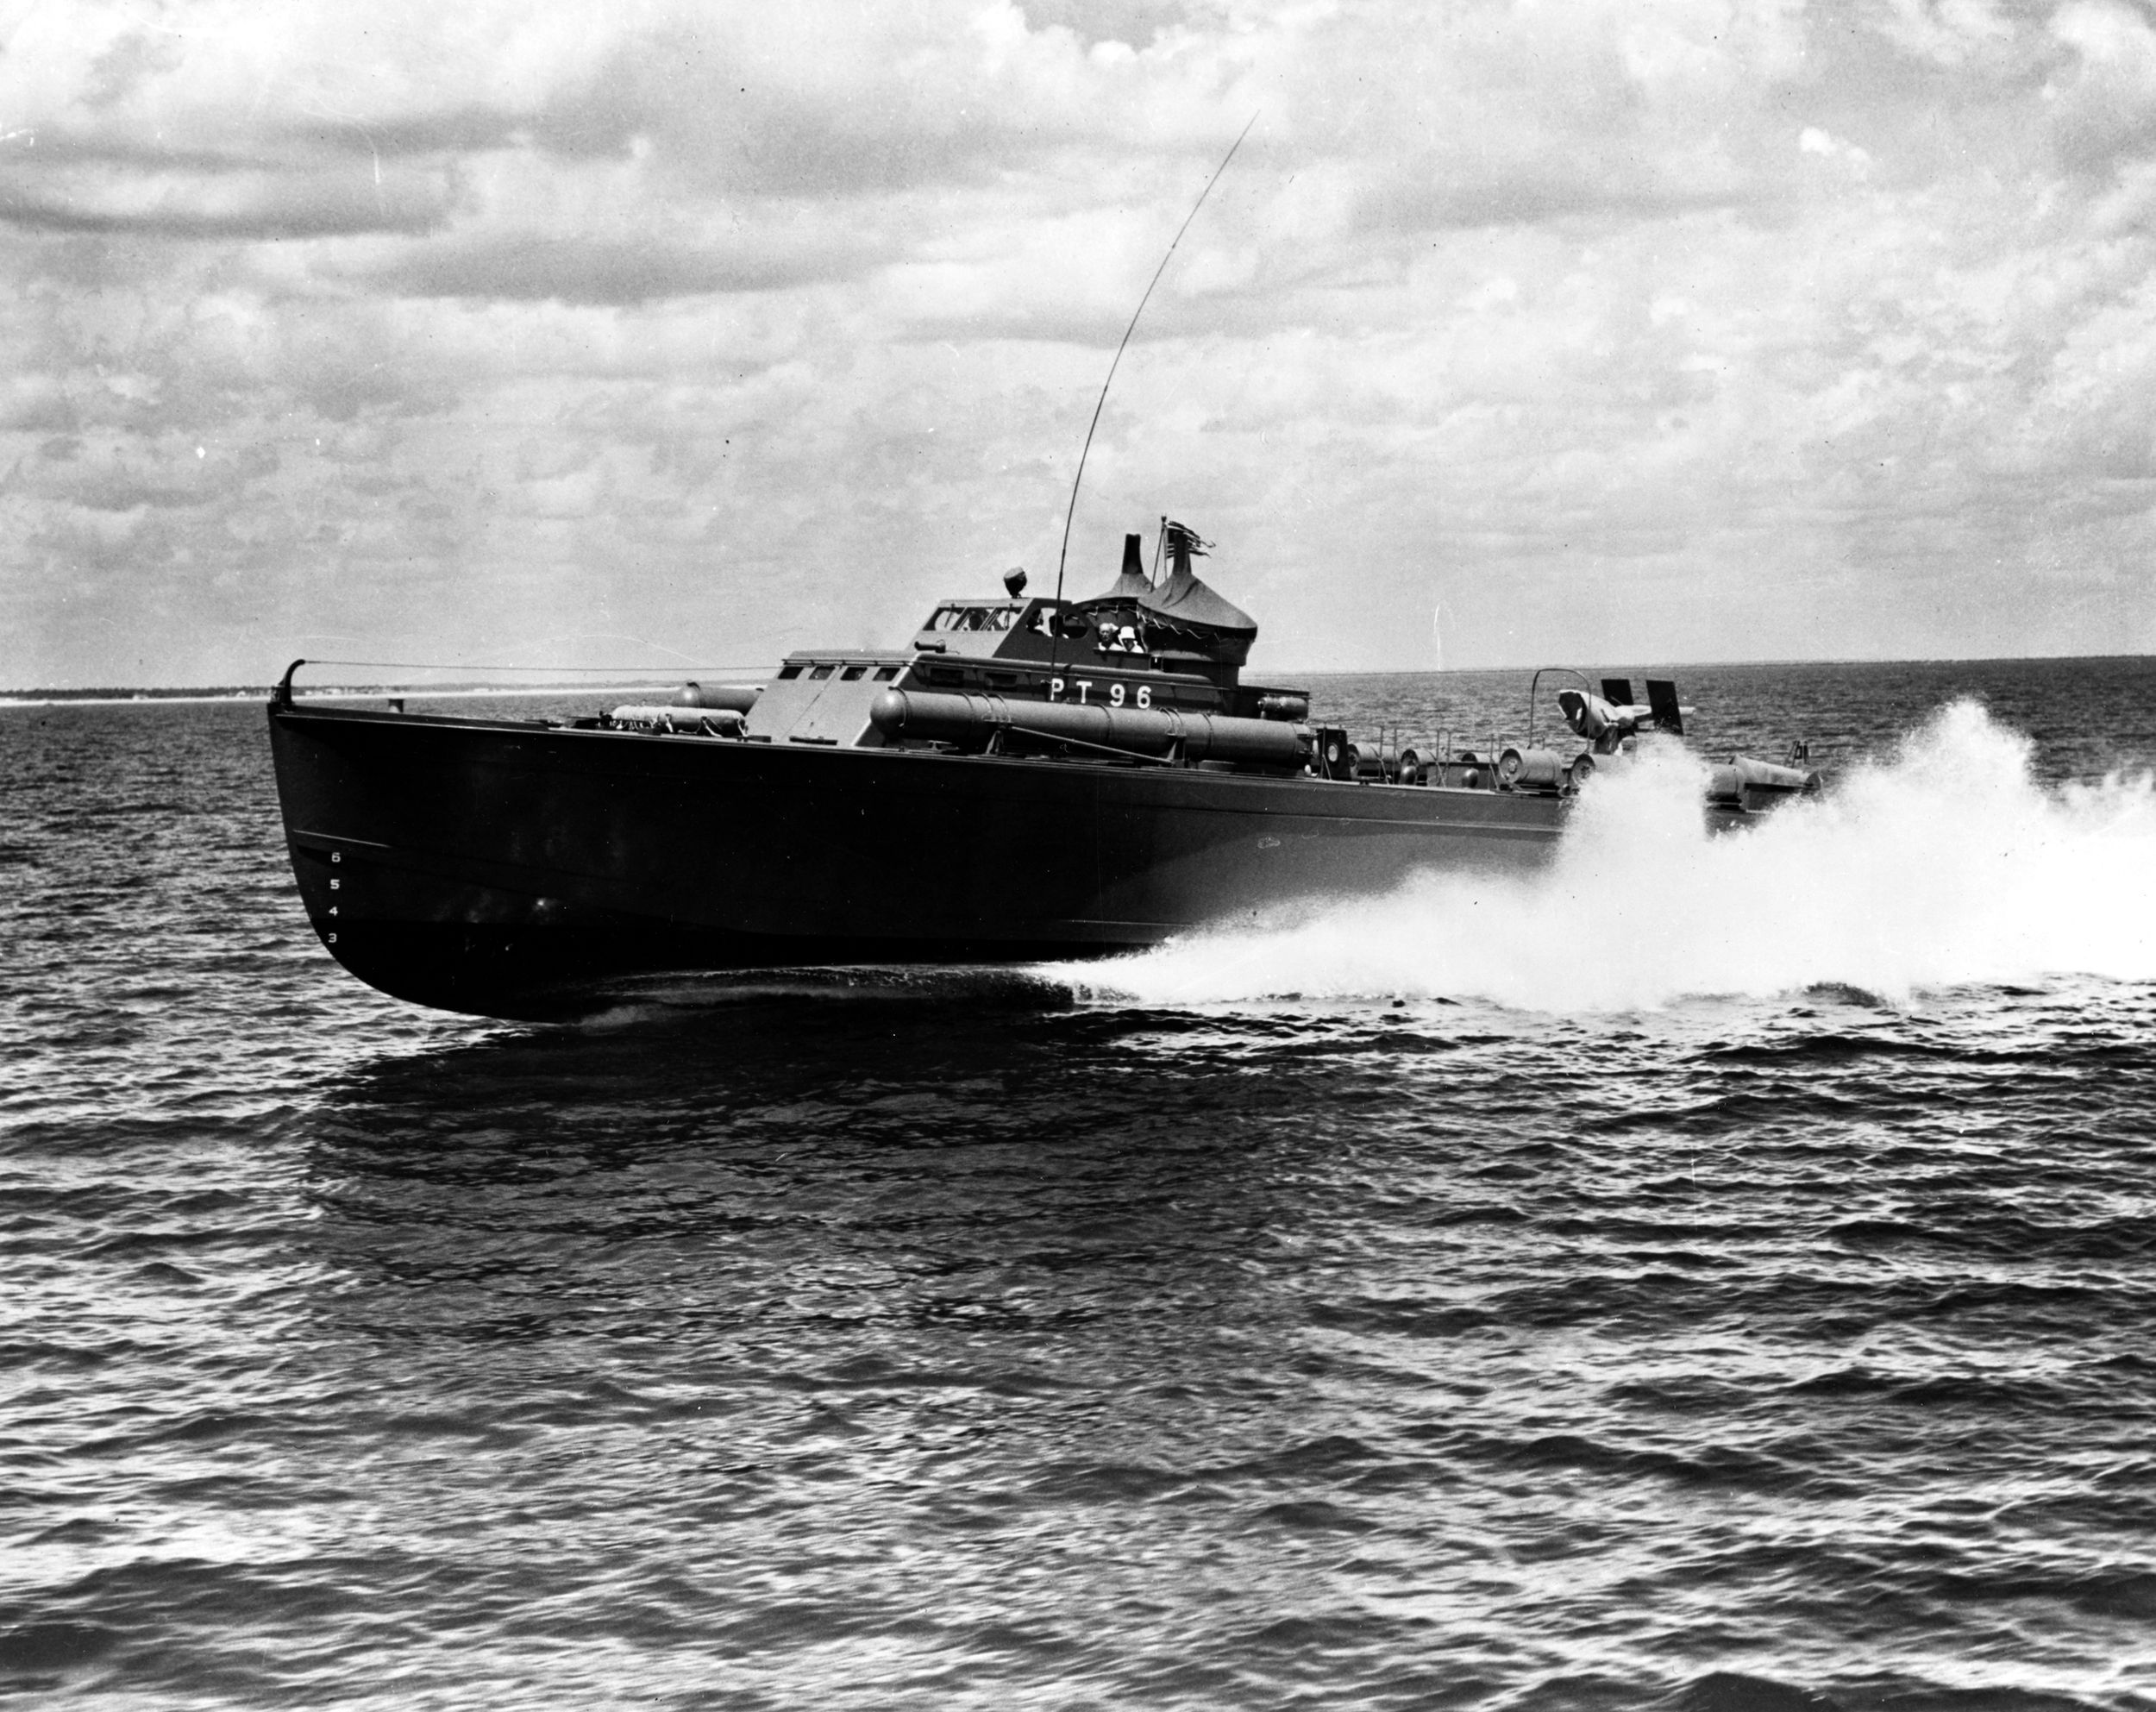 Underway at high speed, PT-96 demonstrates the swiftness of the light patrol craft. Note the external torpedo tube visible on deck. This photo was taken in 1942.